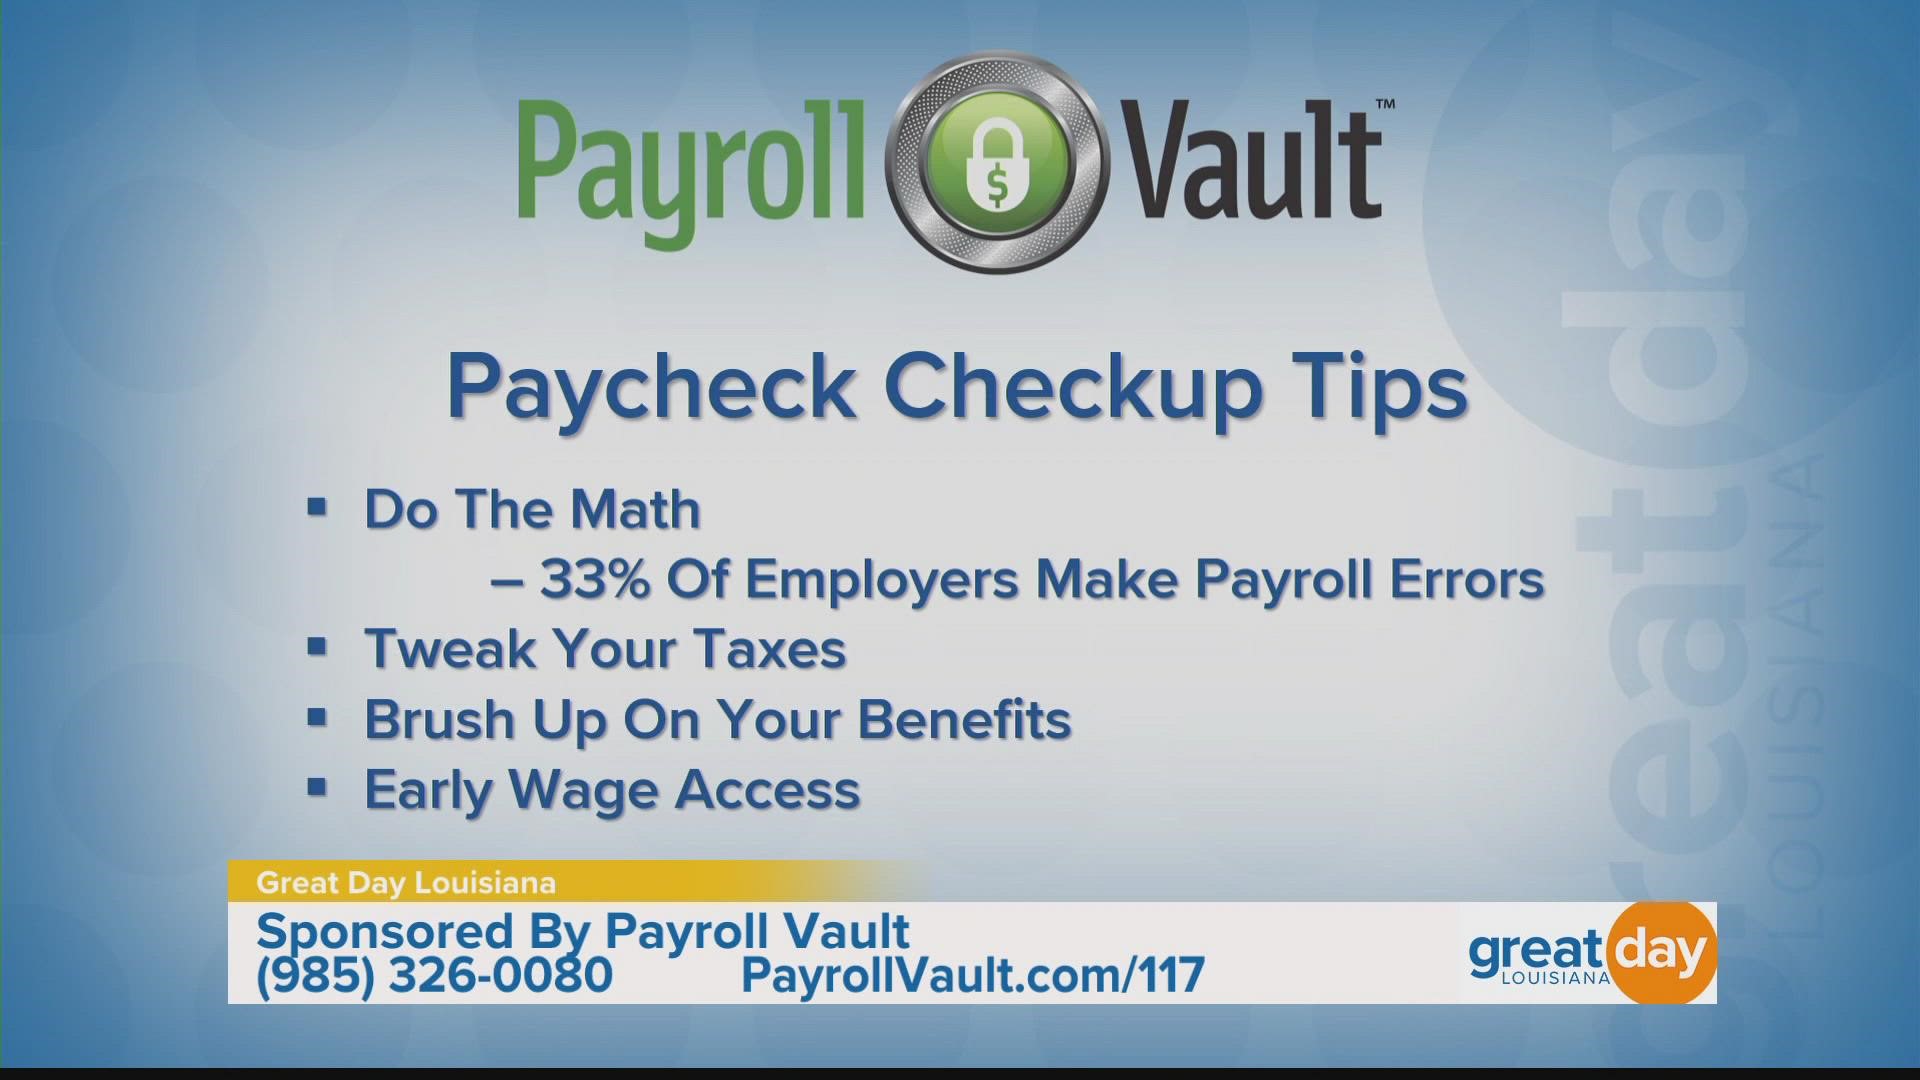 Sean Thomas shares tips for stretching your paycheck.